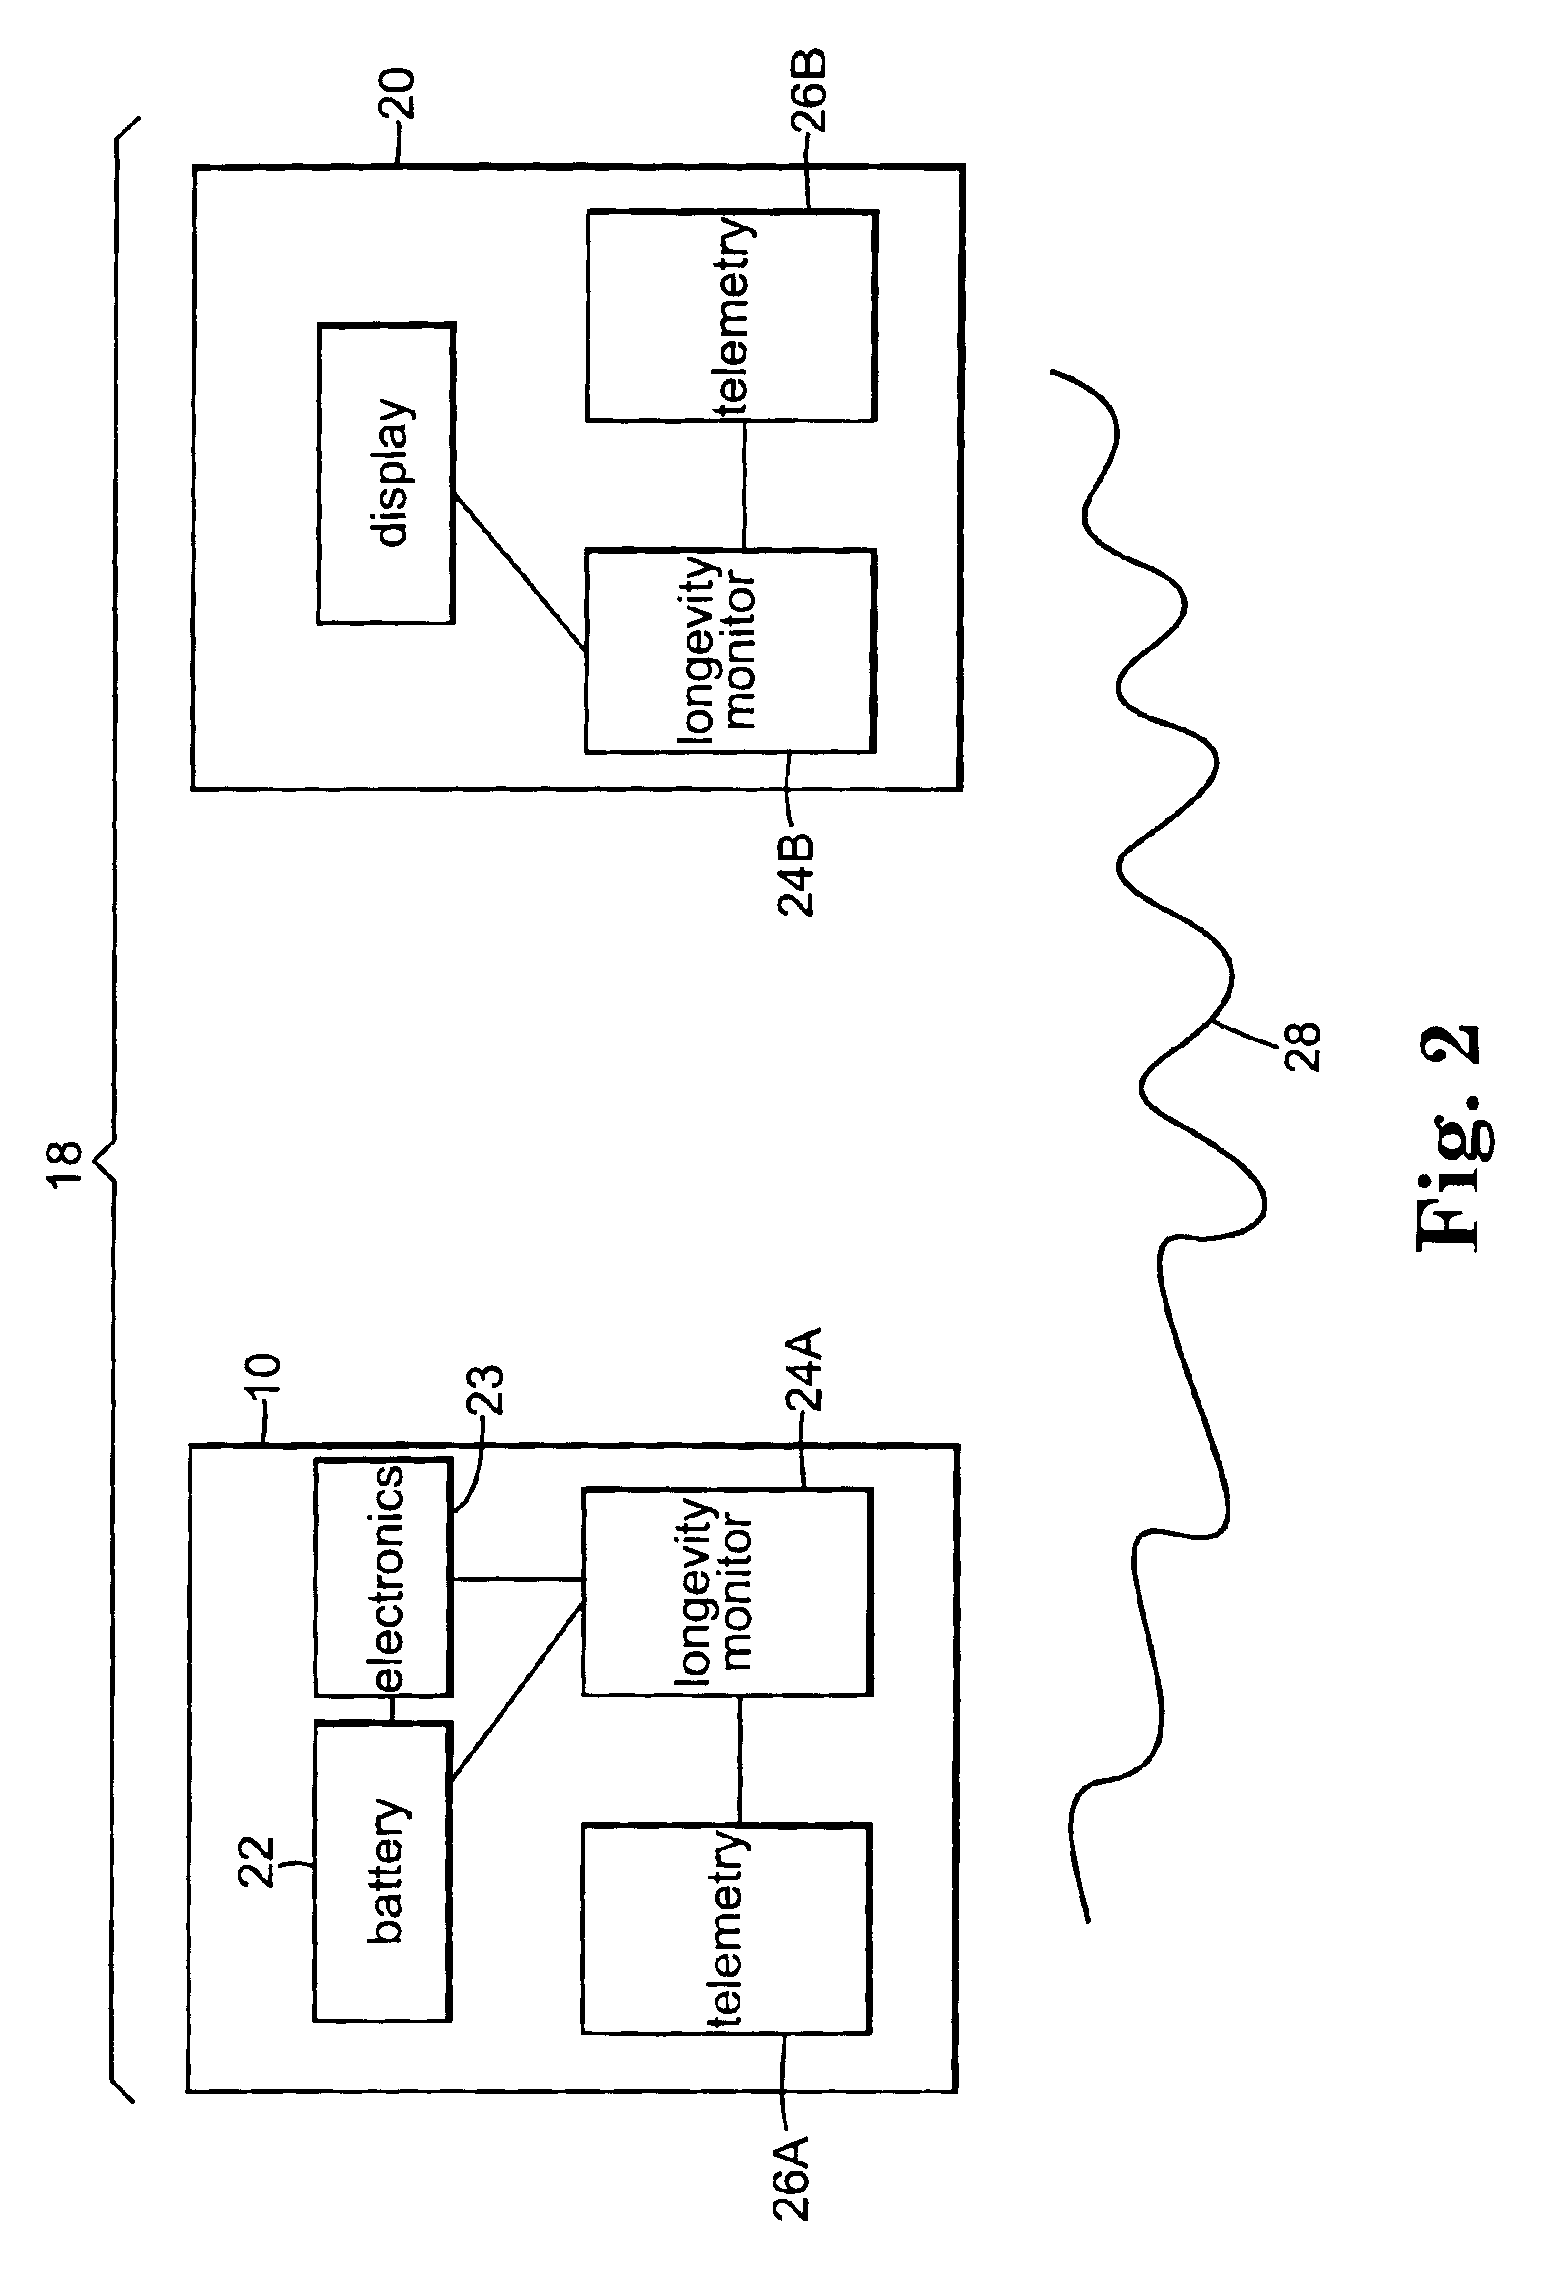 System and method for monitoring power source longevity of an implantable medical device